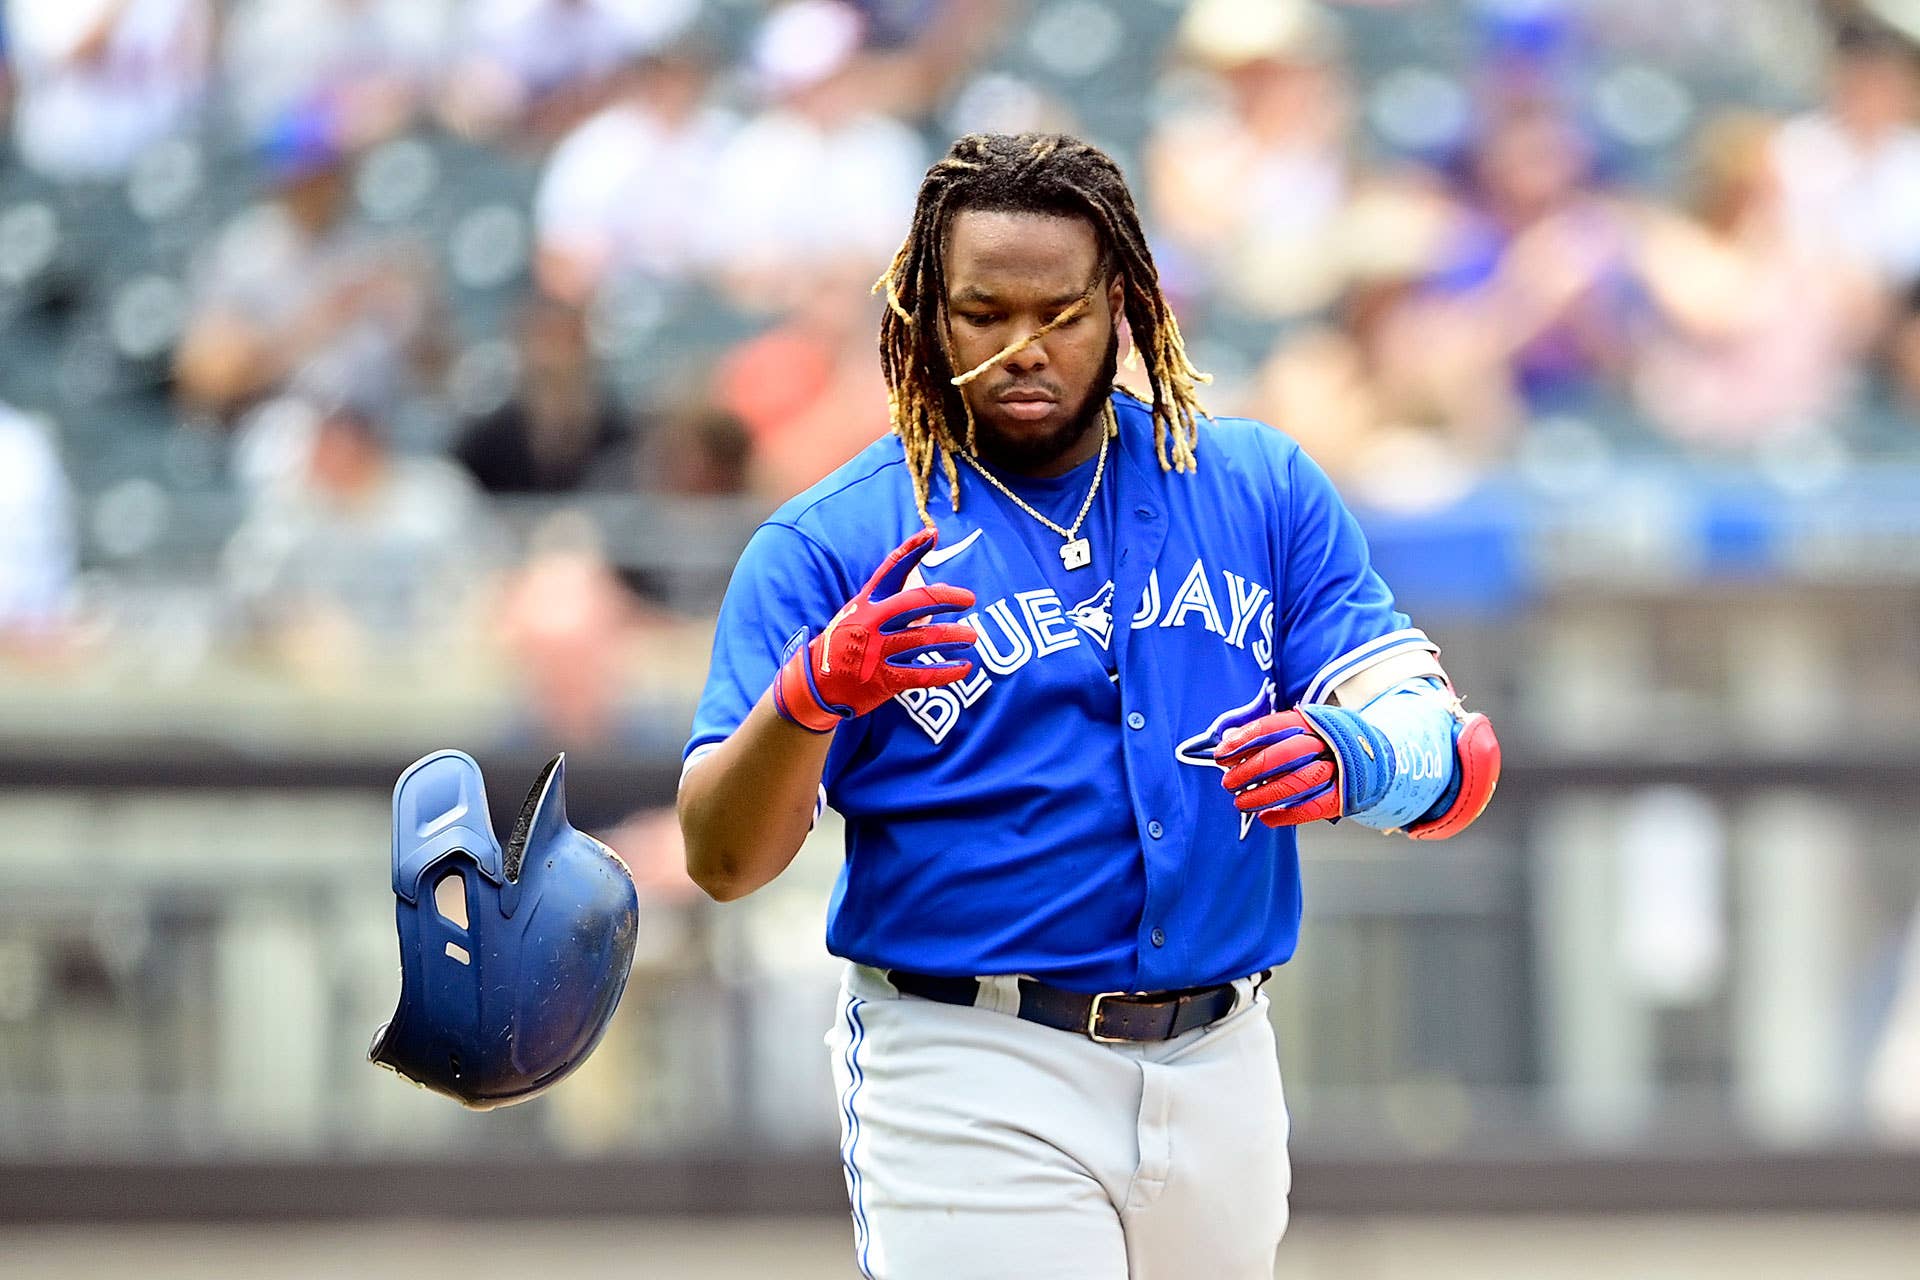 Vladimir Guerrero Jr. #27 of the Toronto Blue Jays tosses his helmet after flying out against the New York Mets